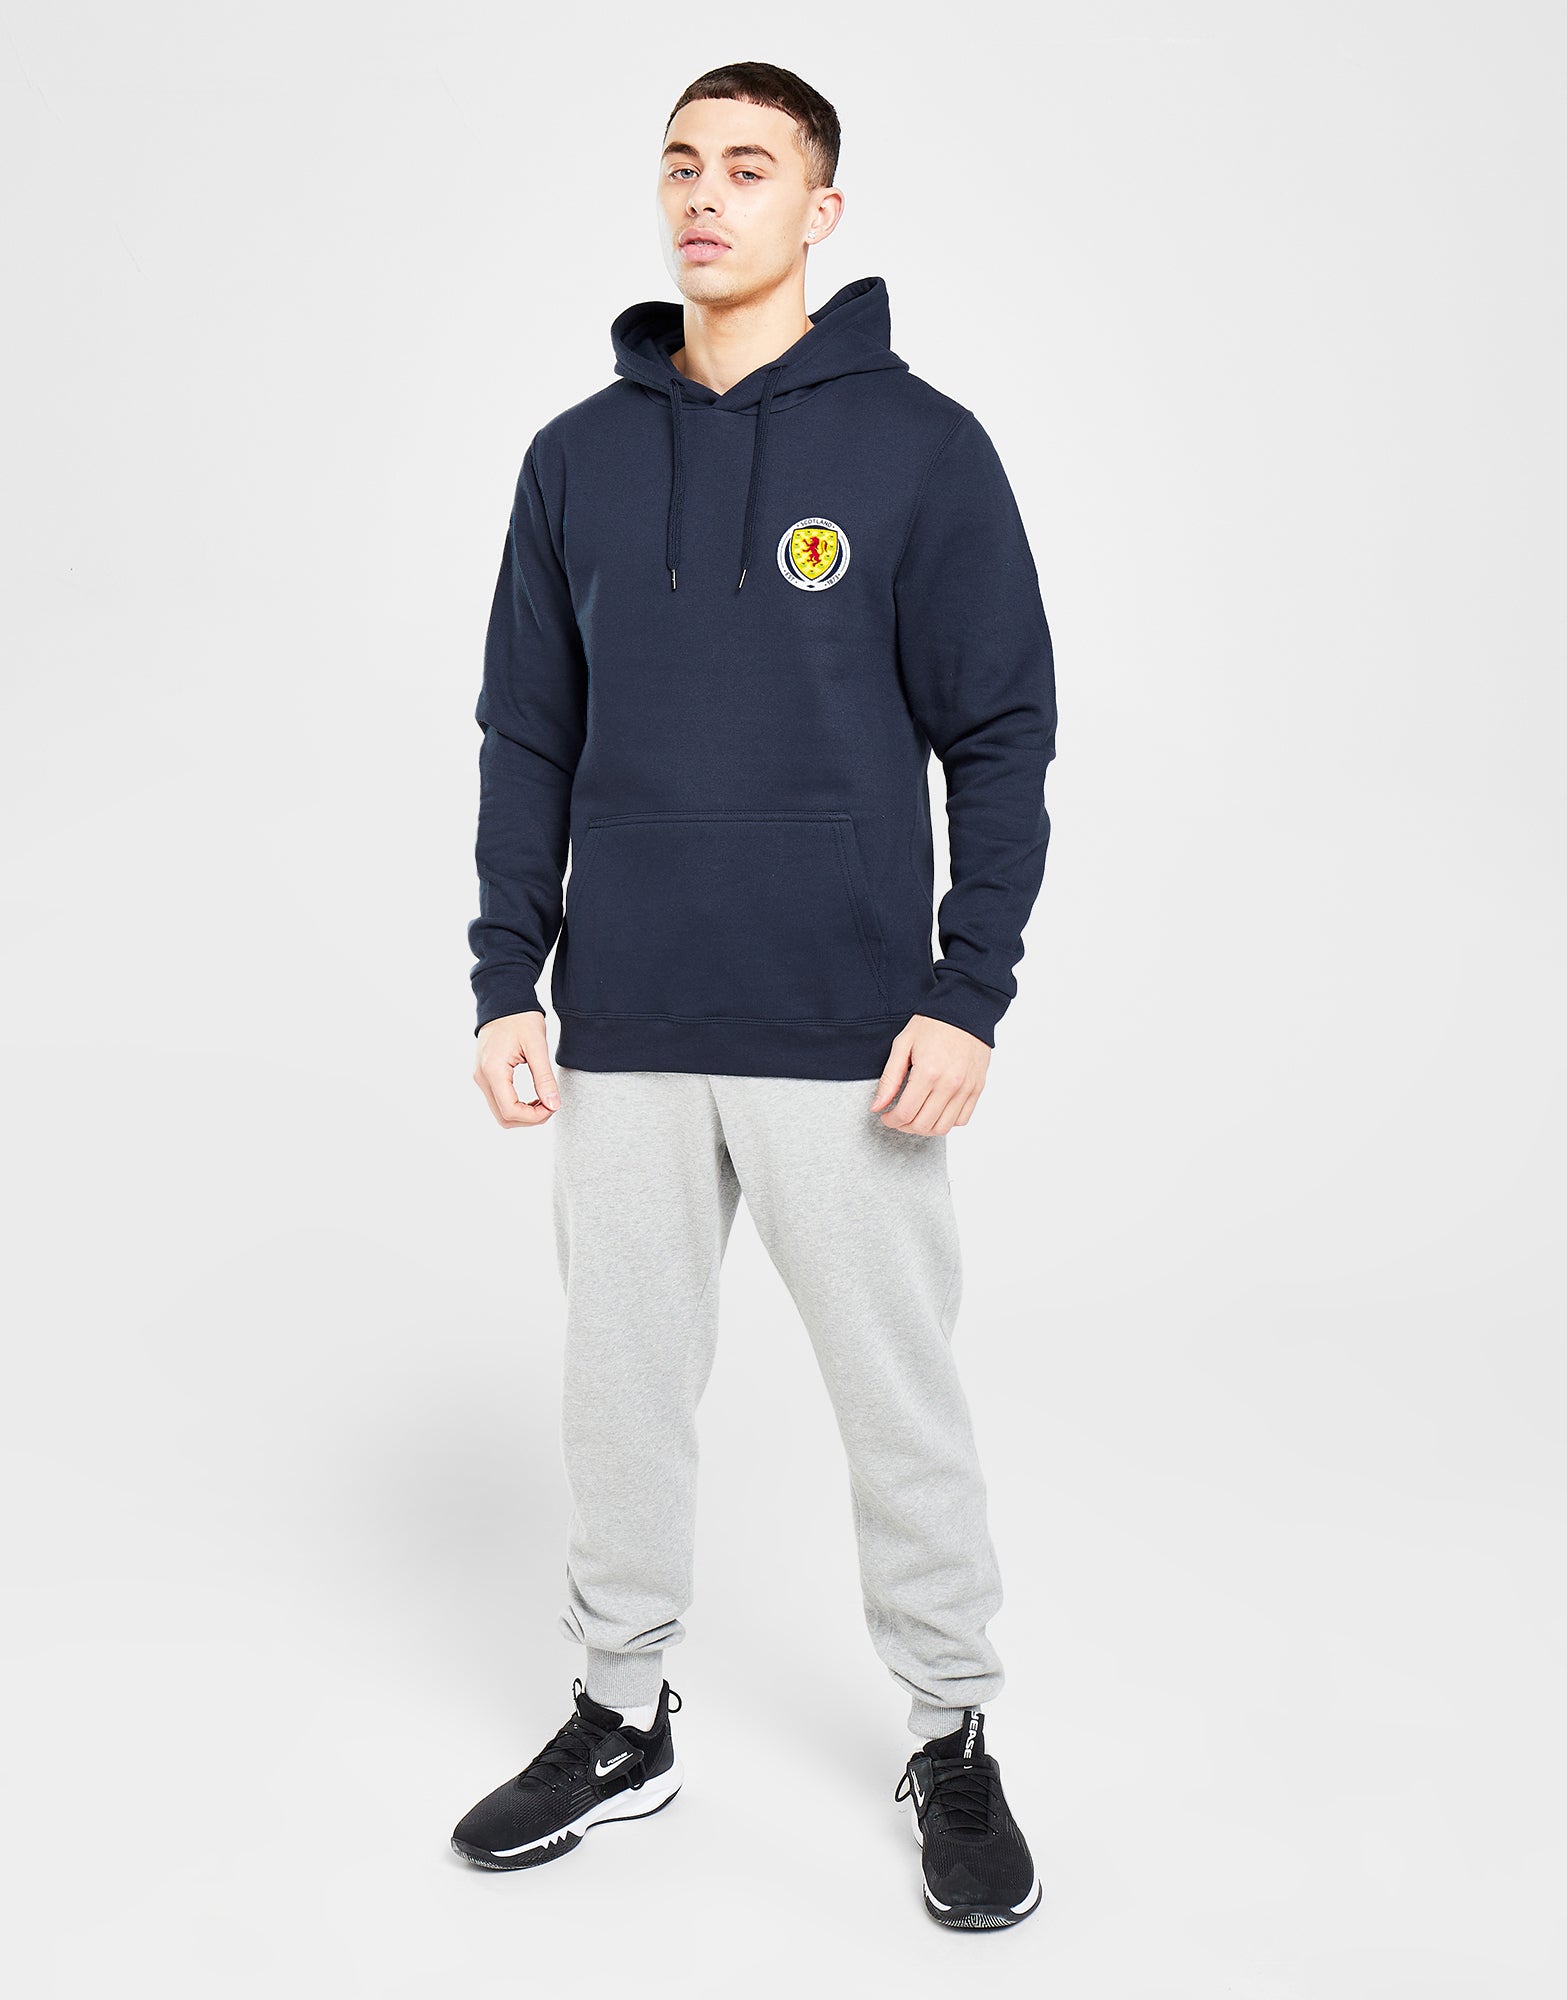 Official Team Scotland Crest Badge Hoodie - Navy - The World Football Store